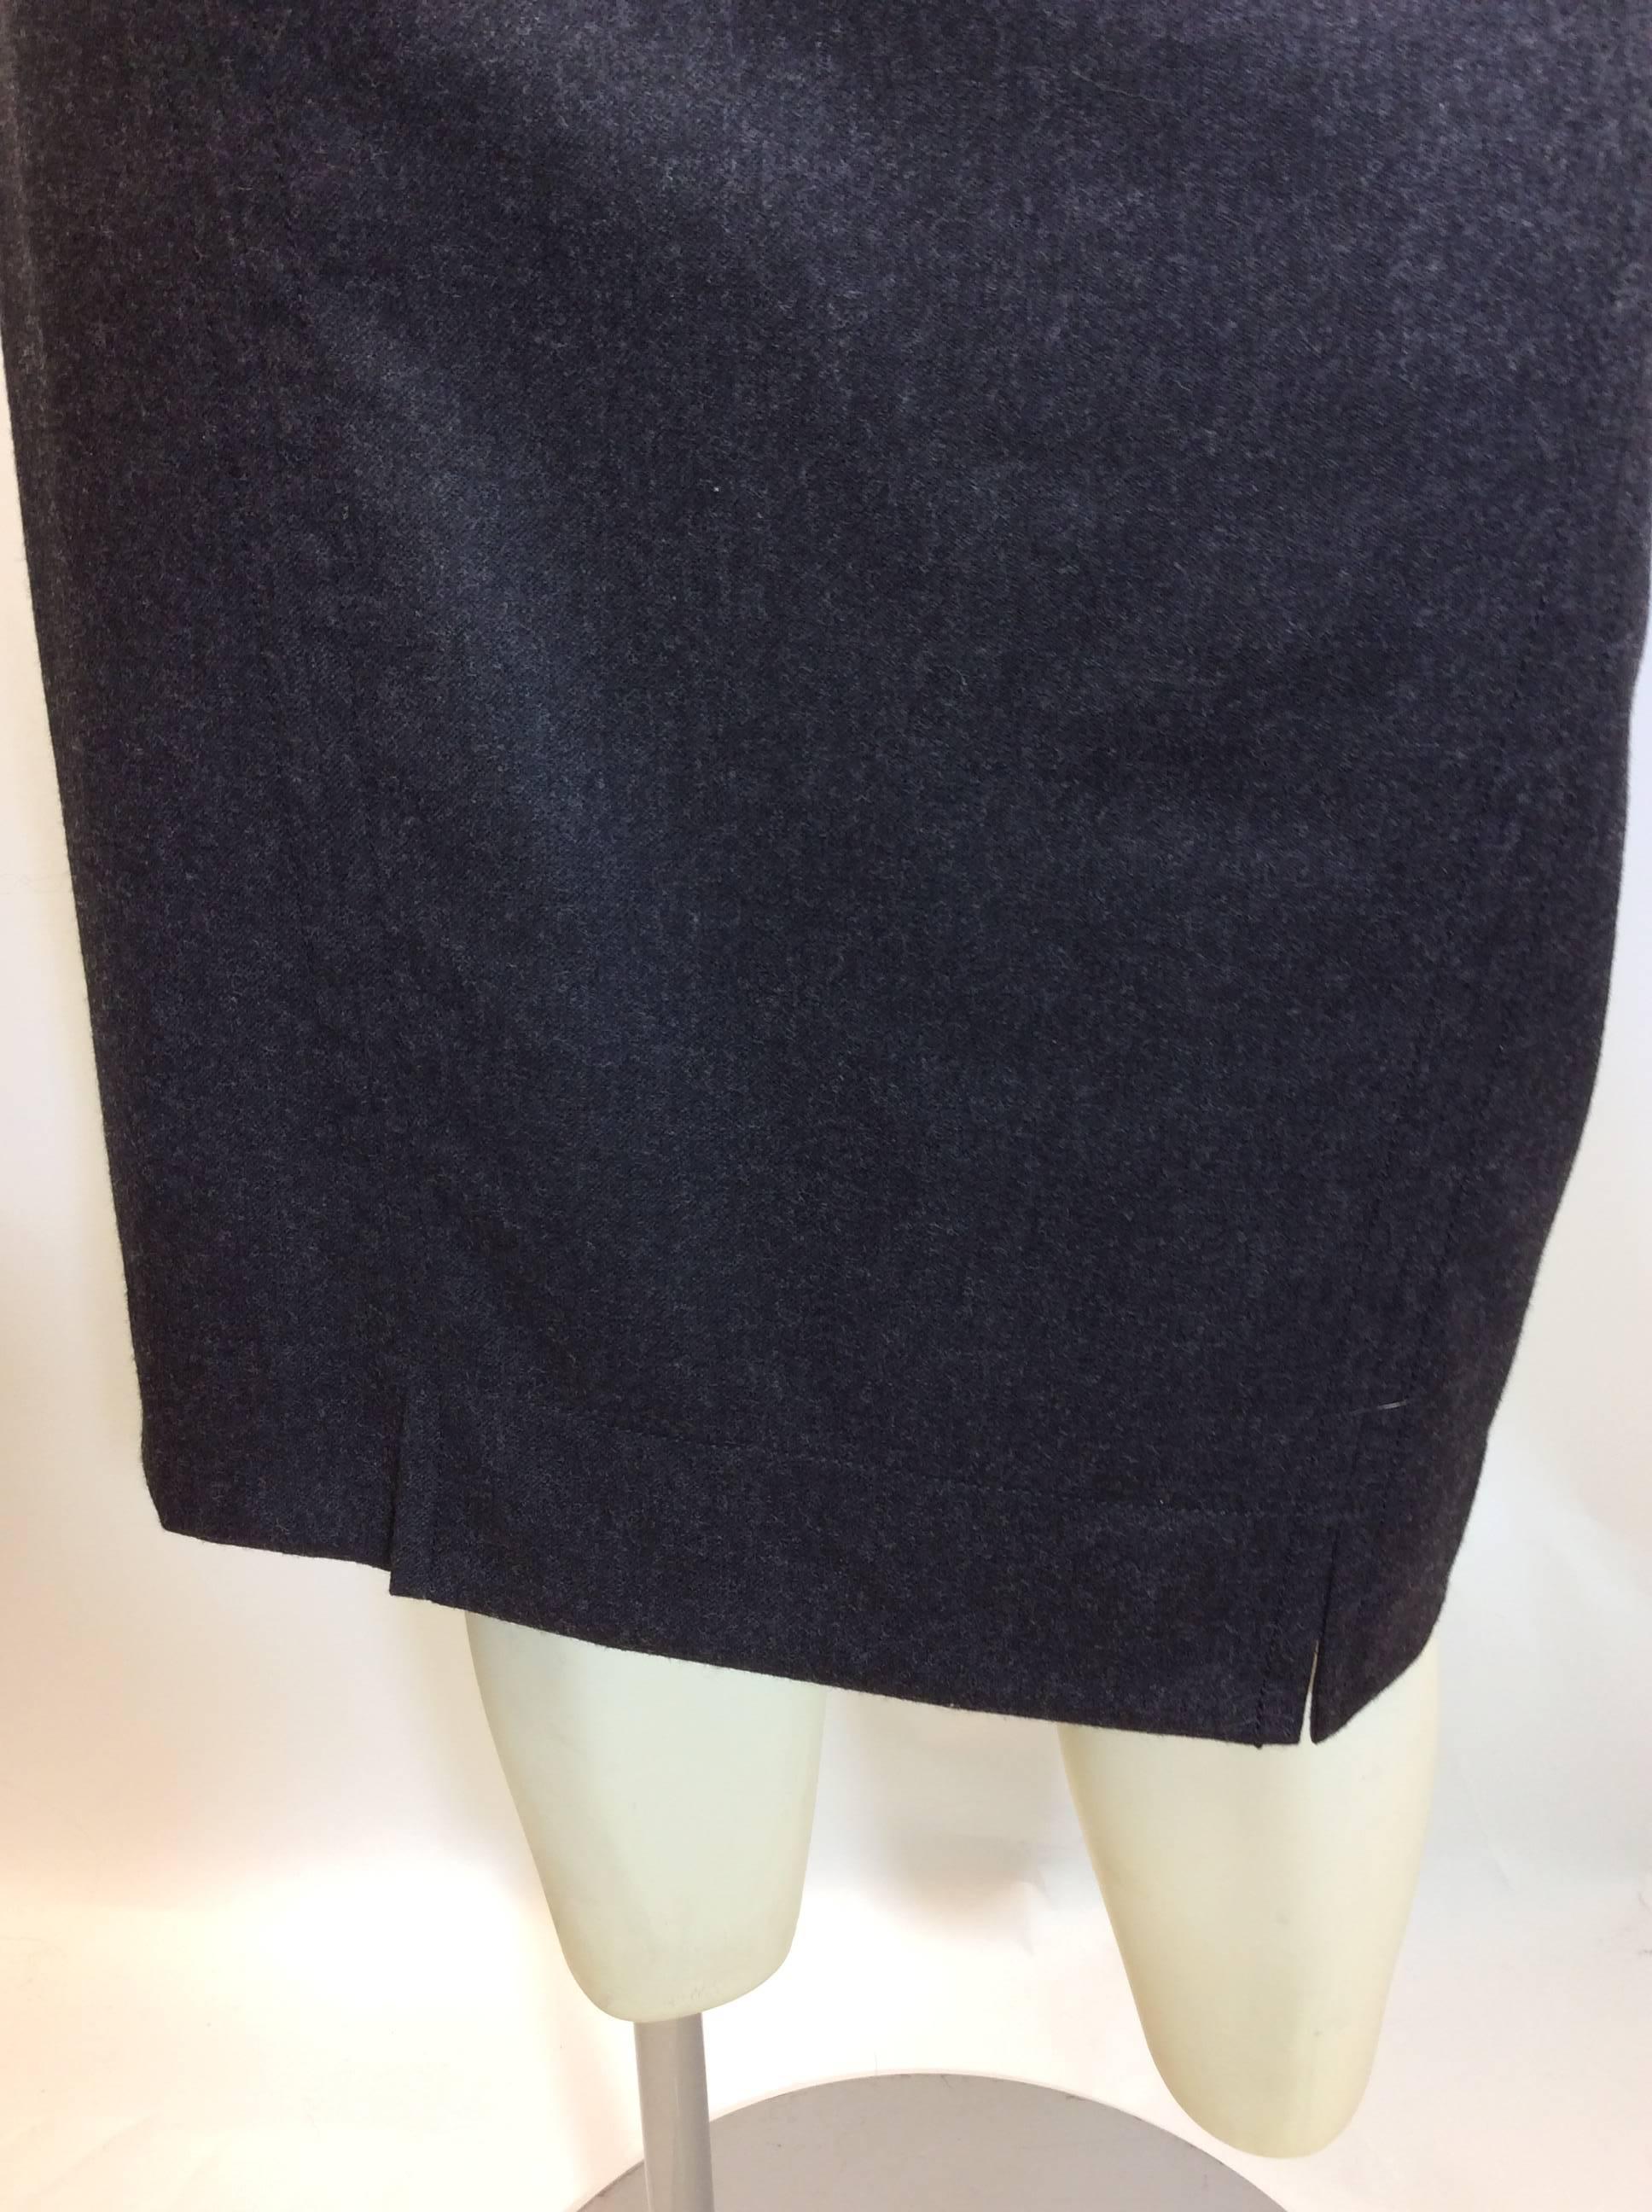 Akris Punto Gray Skirt
Two mini side slits in front and back
Size 8
Interior fully lined
$199